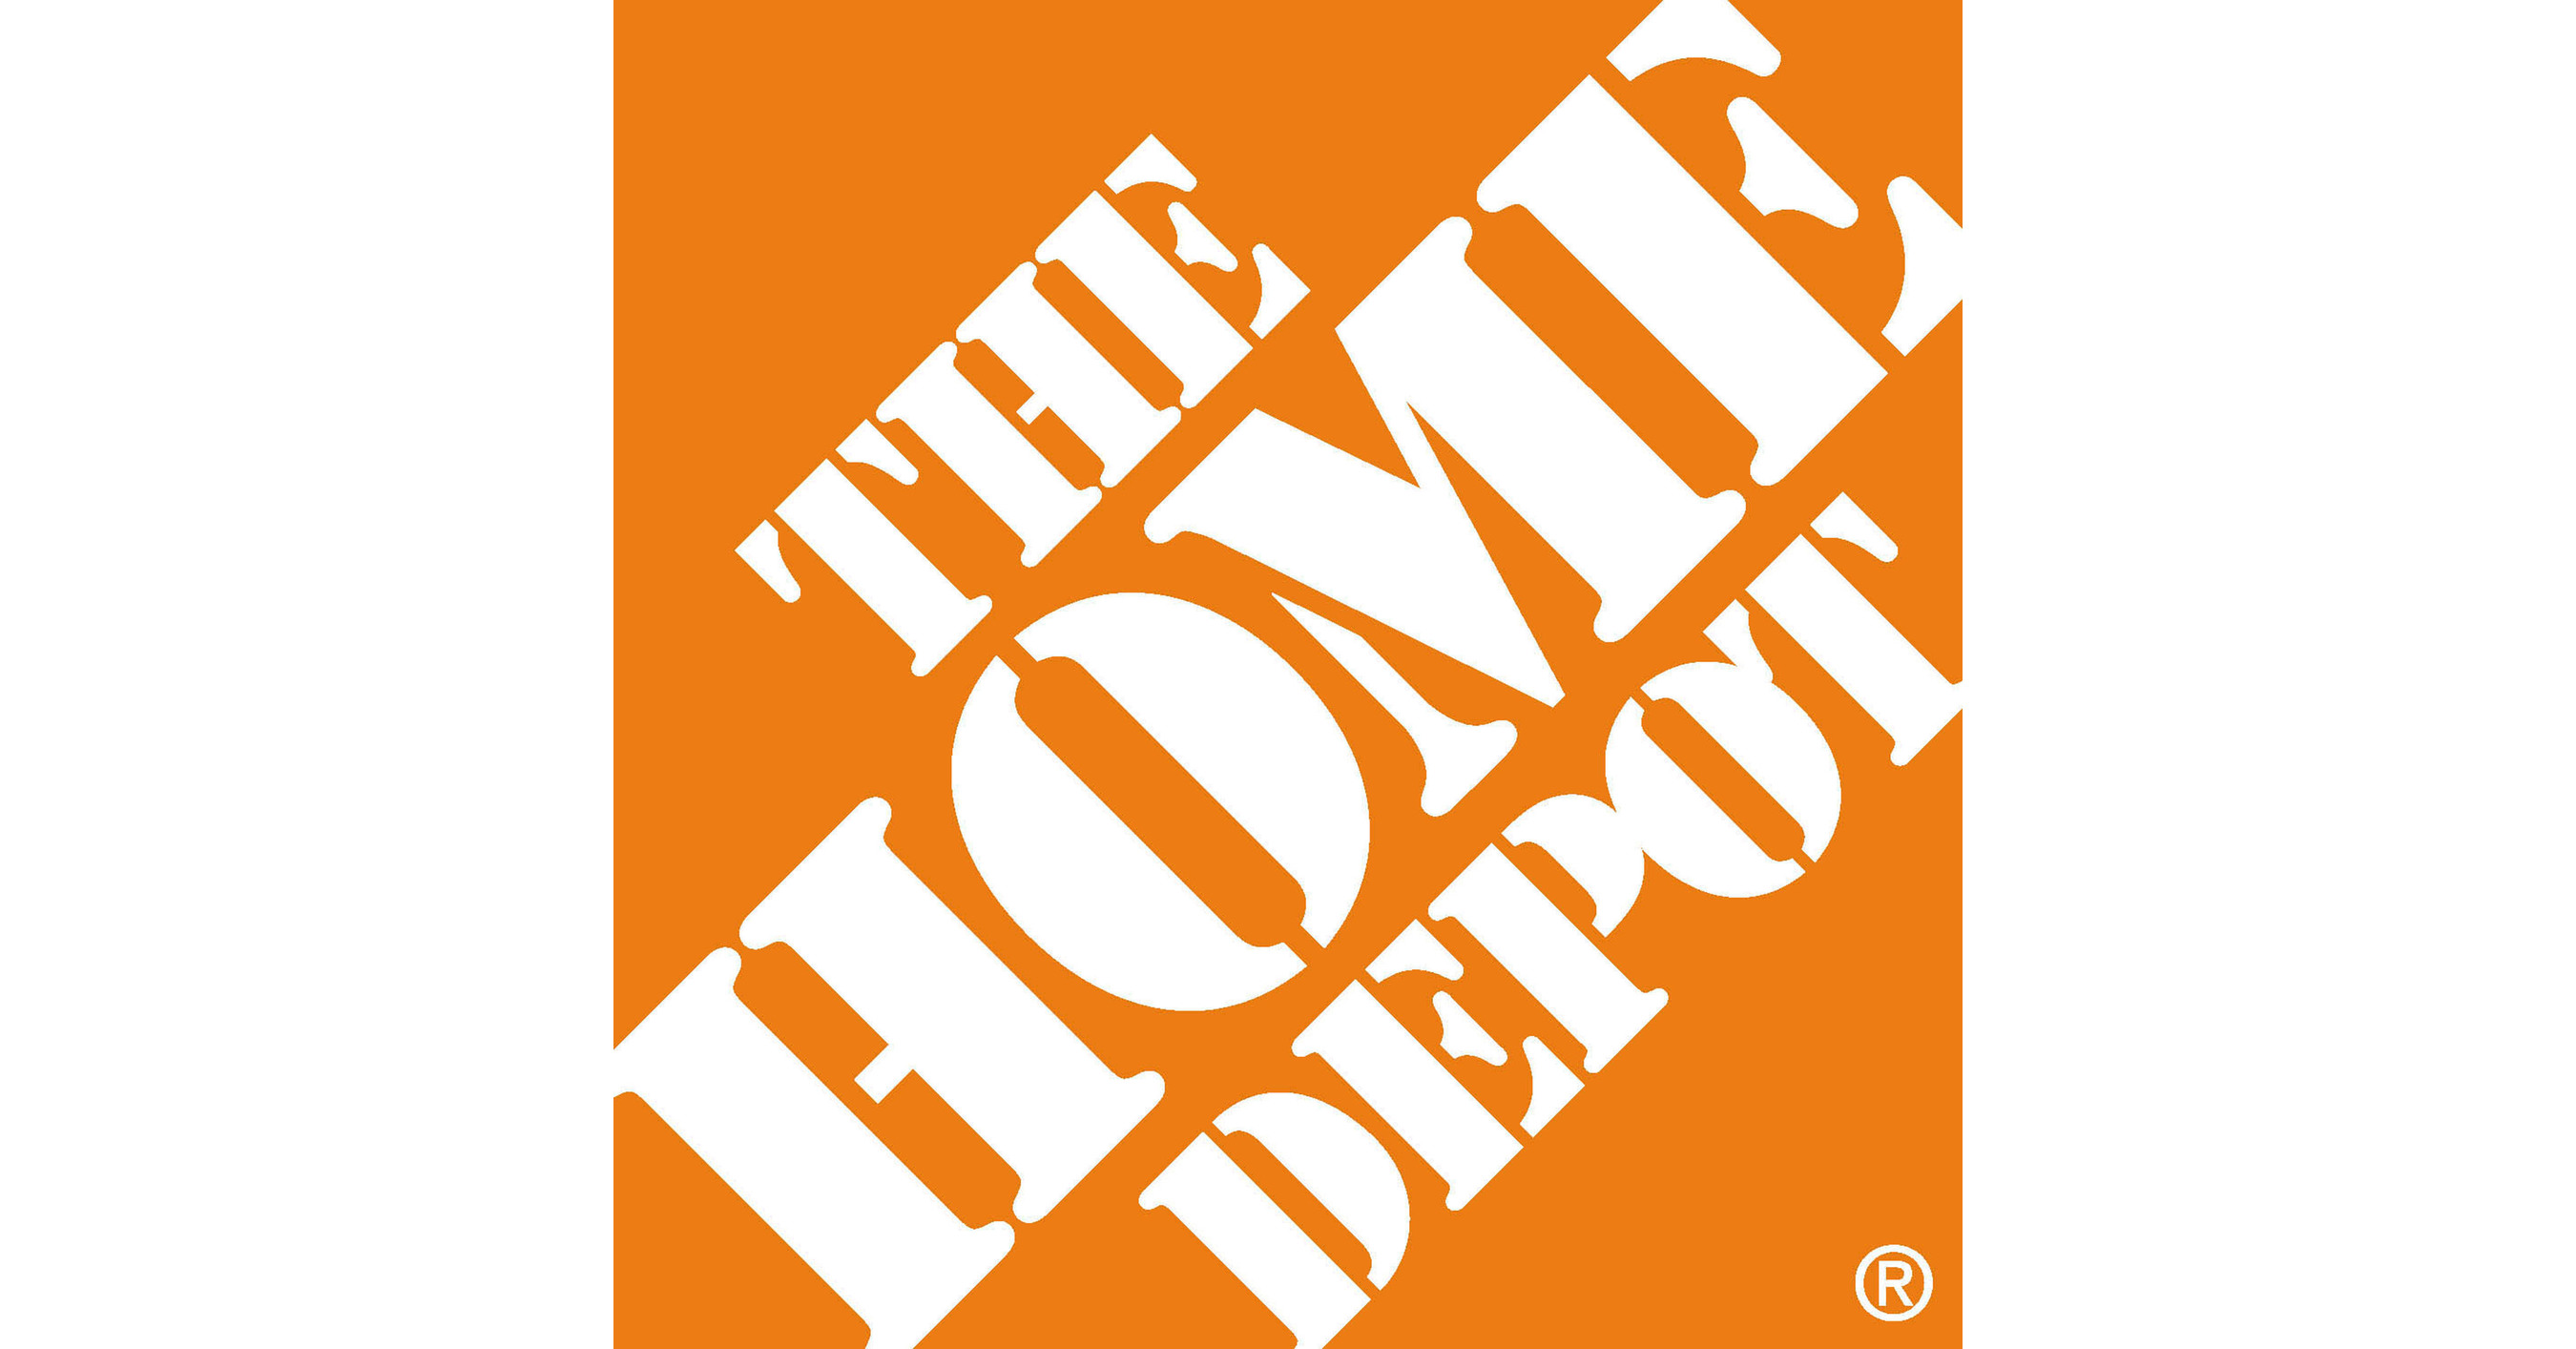 The Home Depot Announces $150 Million Venture Capital Fund to Fuel Innovation in Retail and Home Improvement